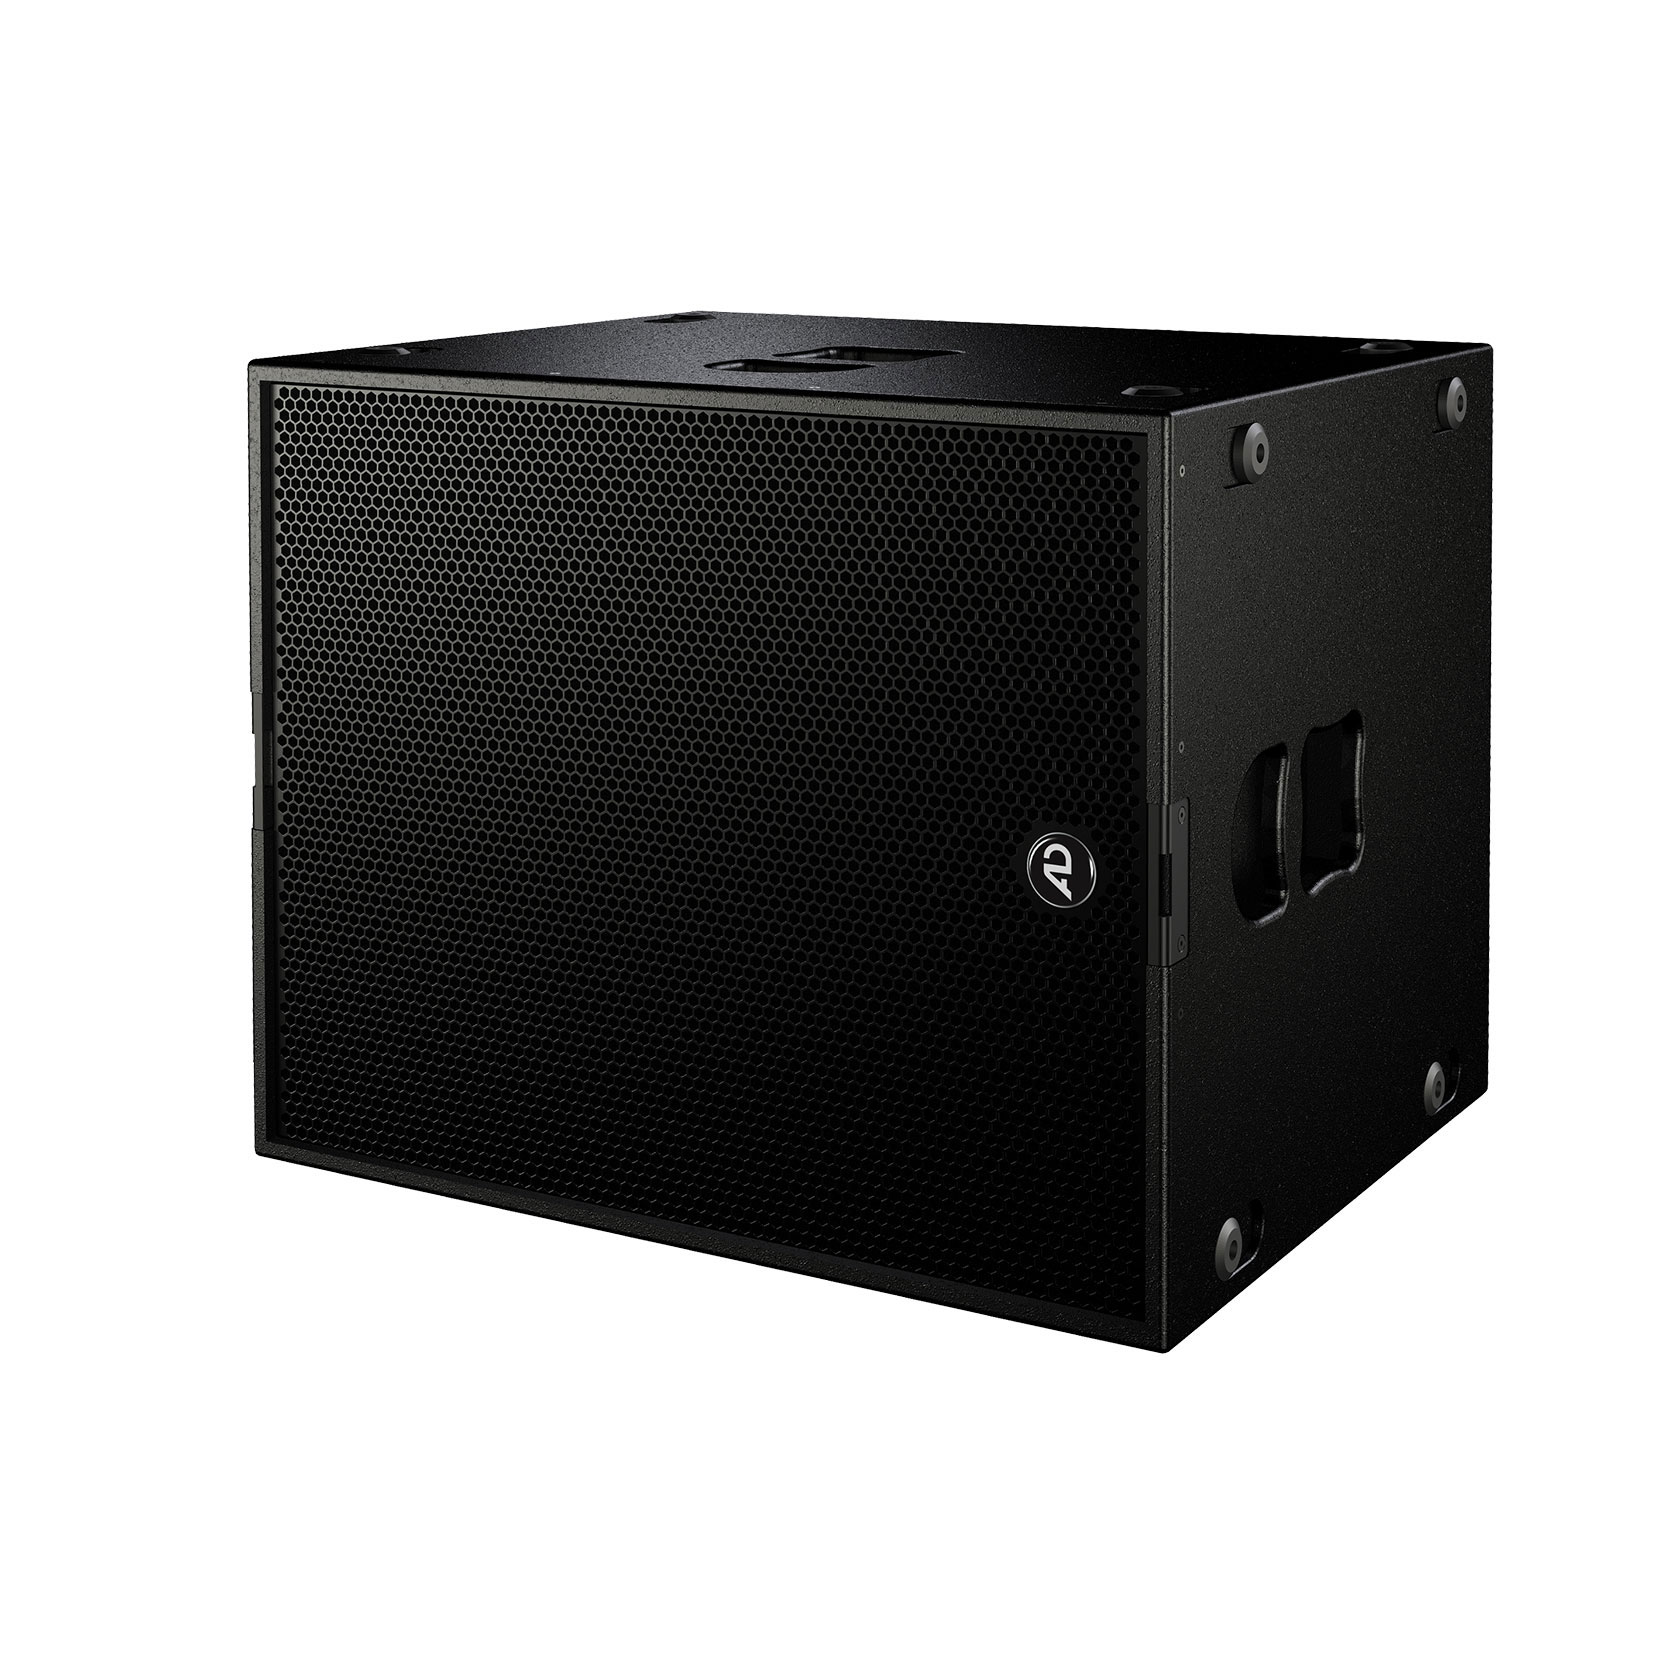 TouringSub 18 Eighteen inch Subwoofer powered AD-Systems